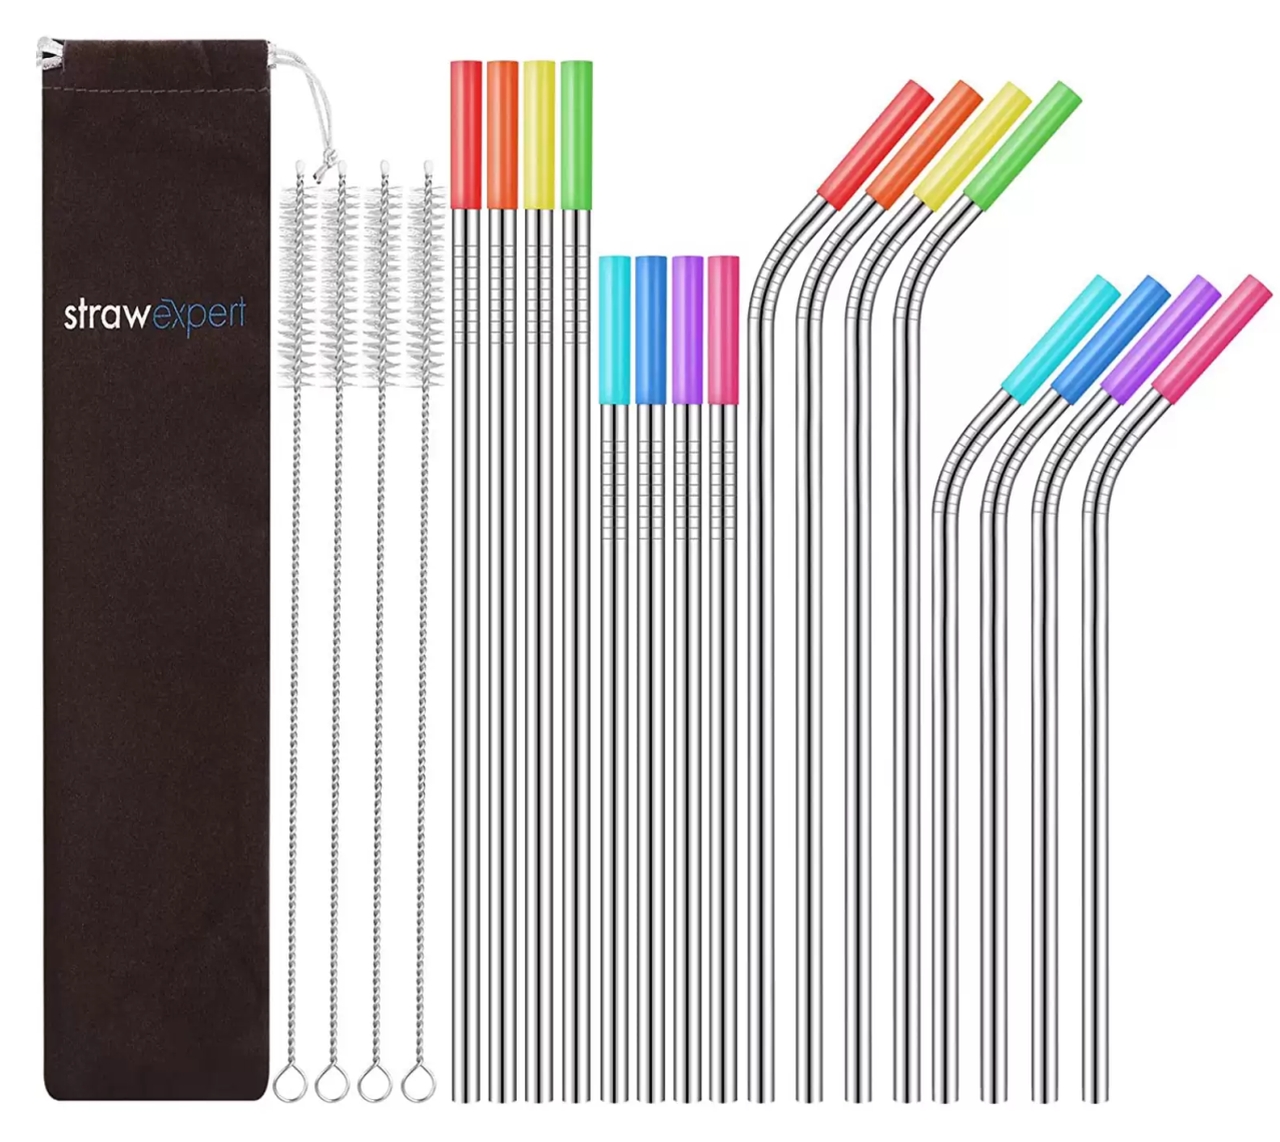 School Picnic 3 Pack Keychain Drinking Straw for Travel Telescopic Portable Stainless Steel Reusable Straws with Case & Cleaning Brush Metal Reusable Collapsible Straws with Silicone Tip 